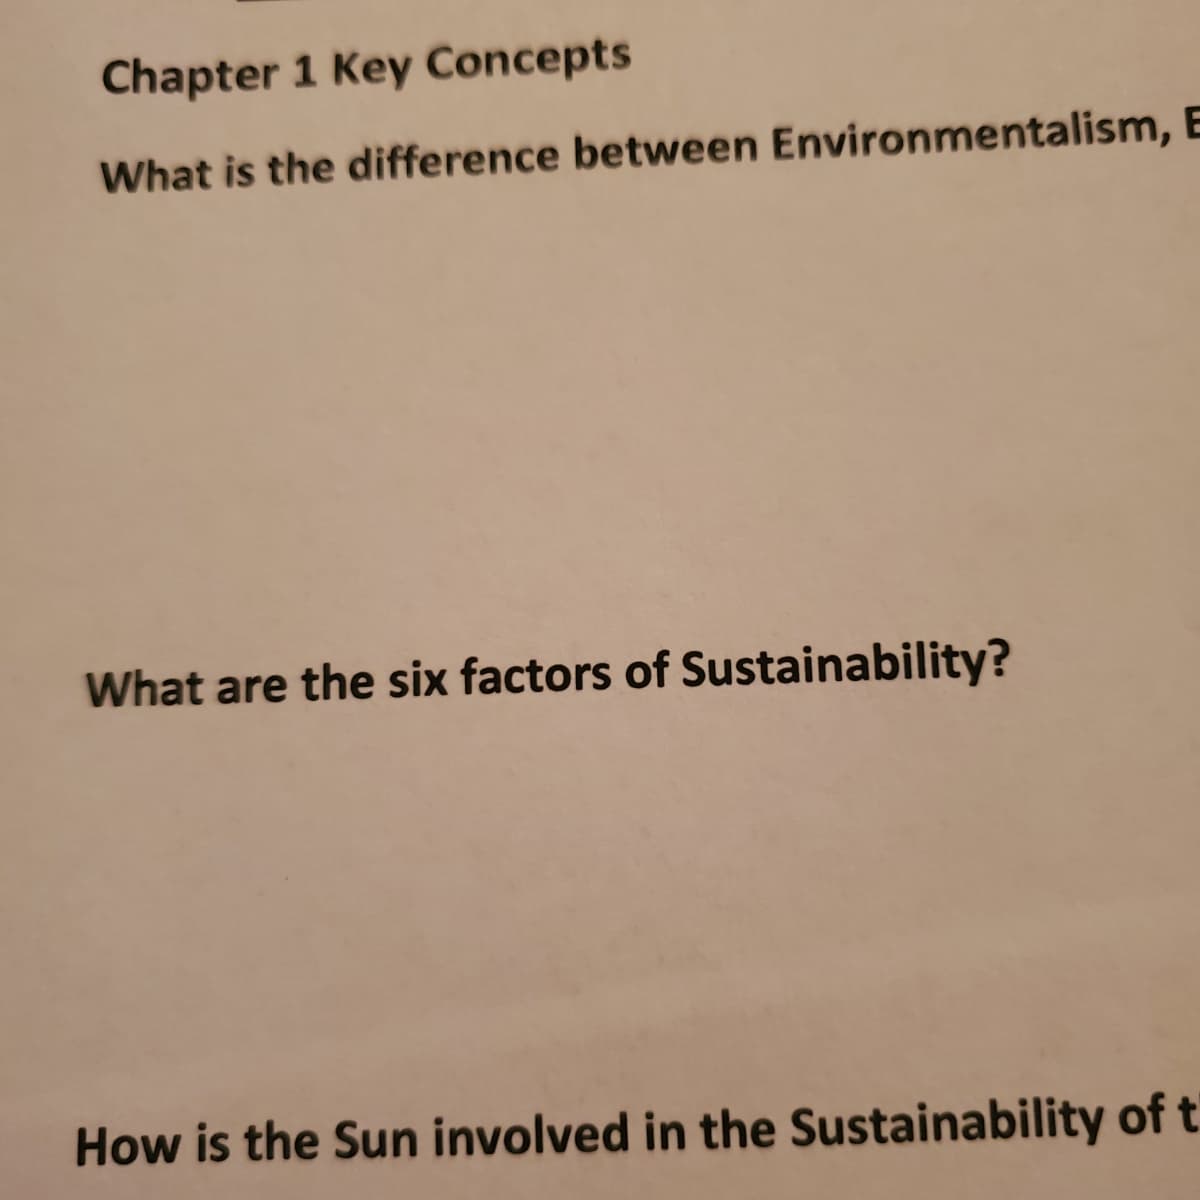 Chapter 1 Key Concepts
What is the difference between Environmentalism, E
What are the six factors of Sustainability?
How is the Sun involved in the Sustainability of t
